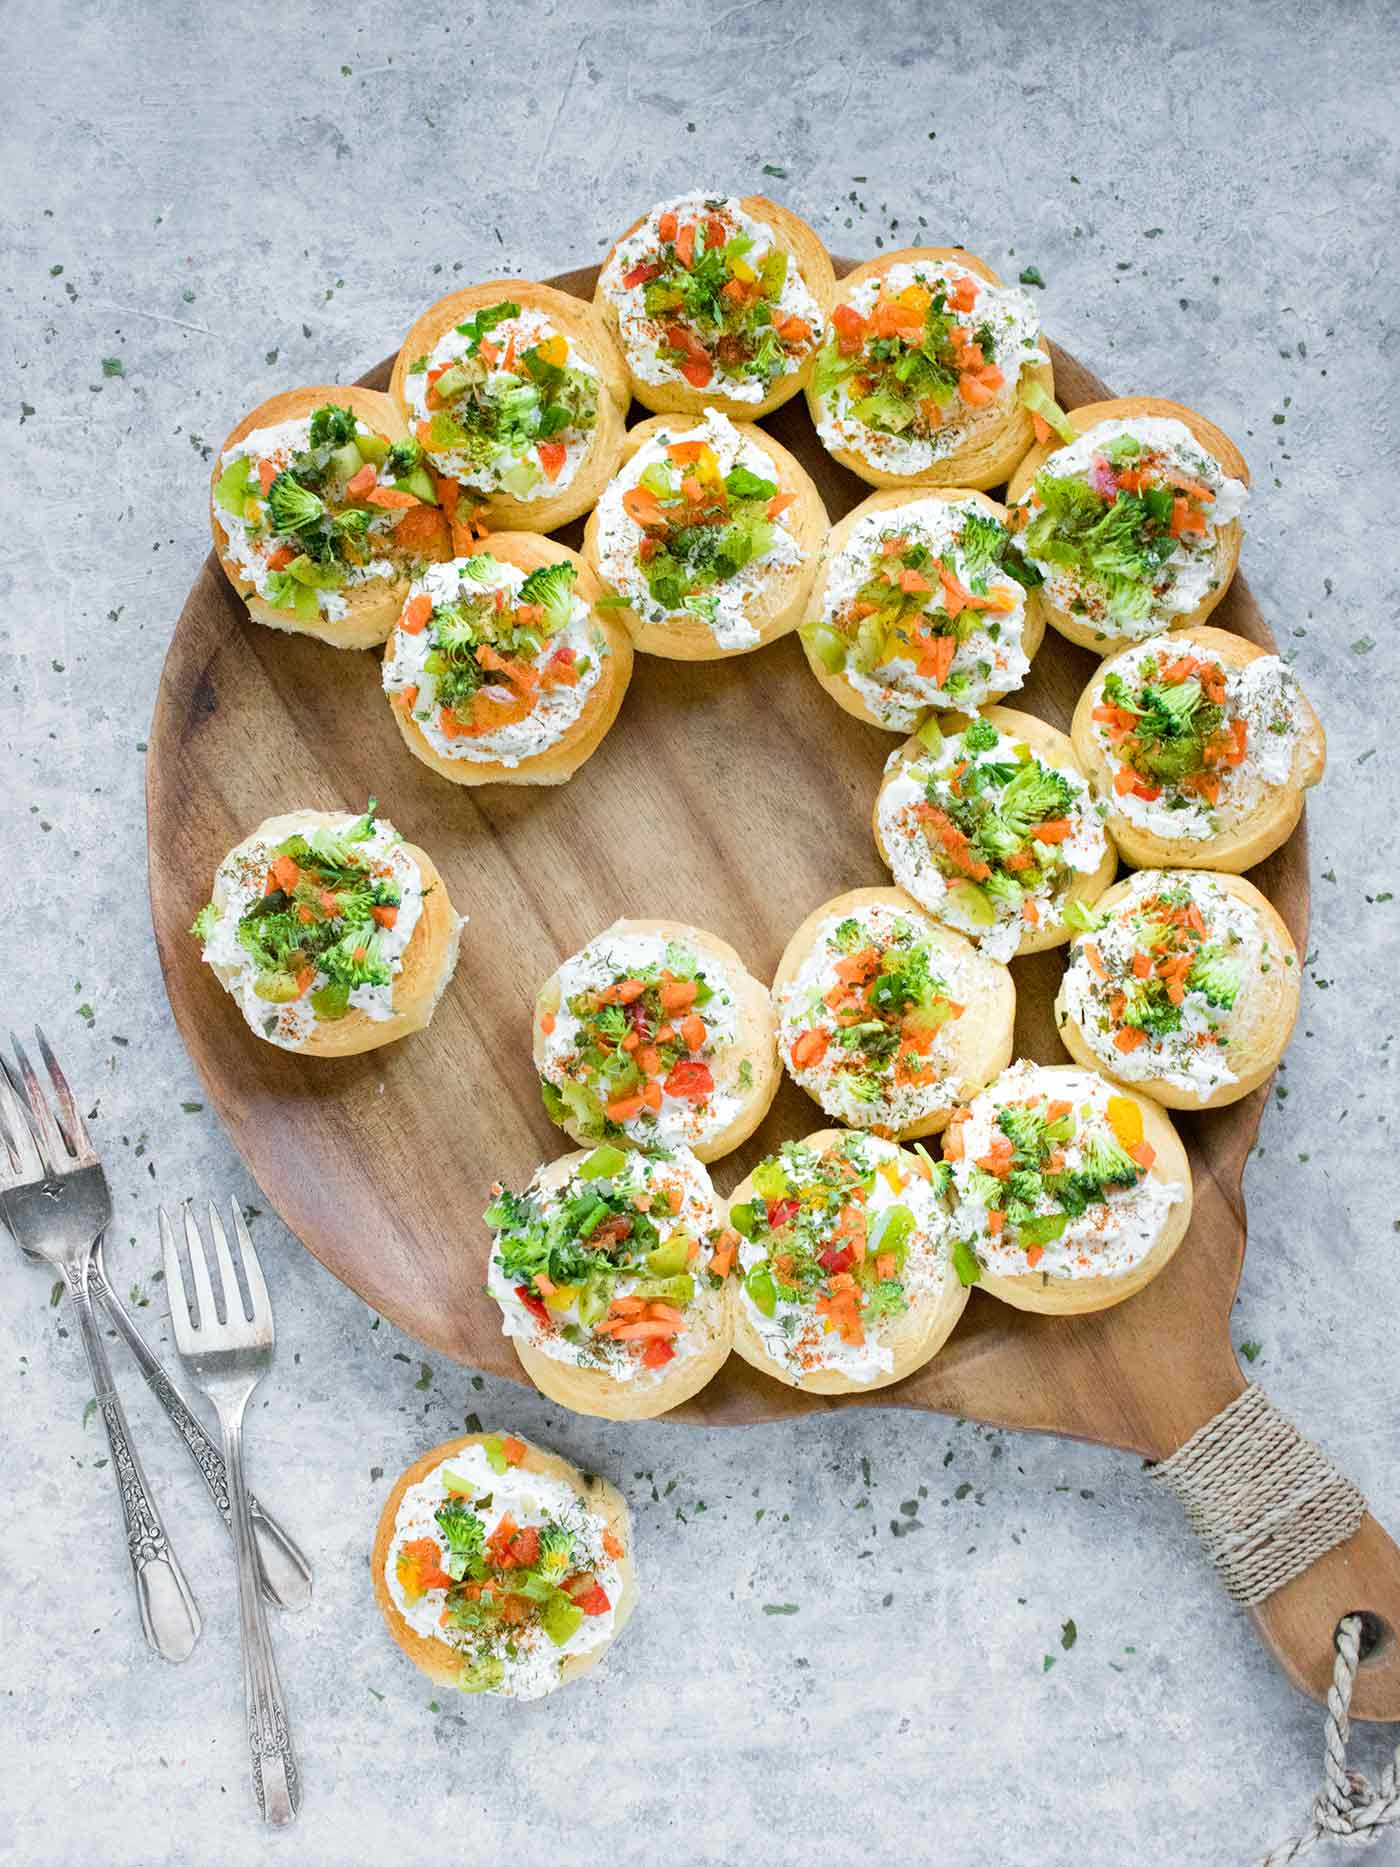 Christmas Appetizers On Pinterest
 Christmas Wreath Appetizers